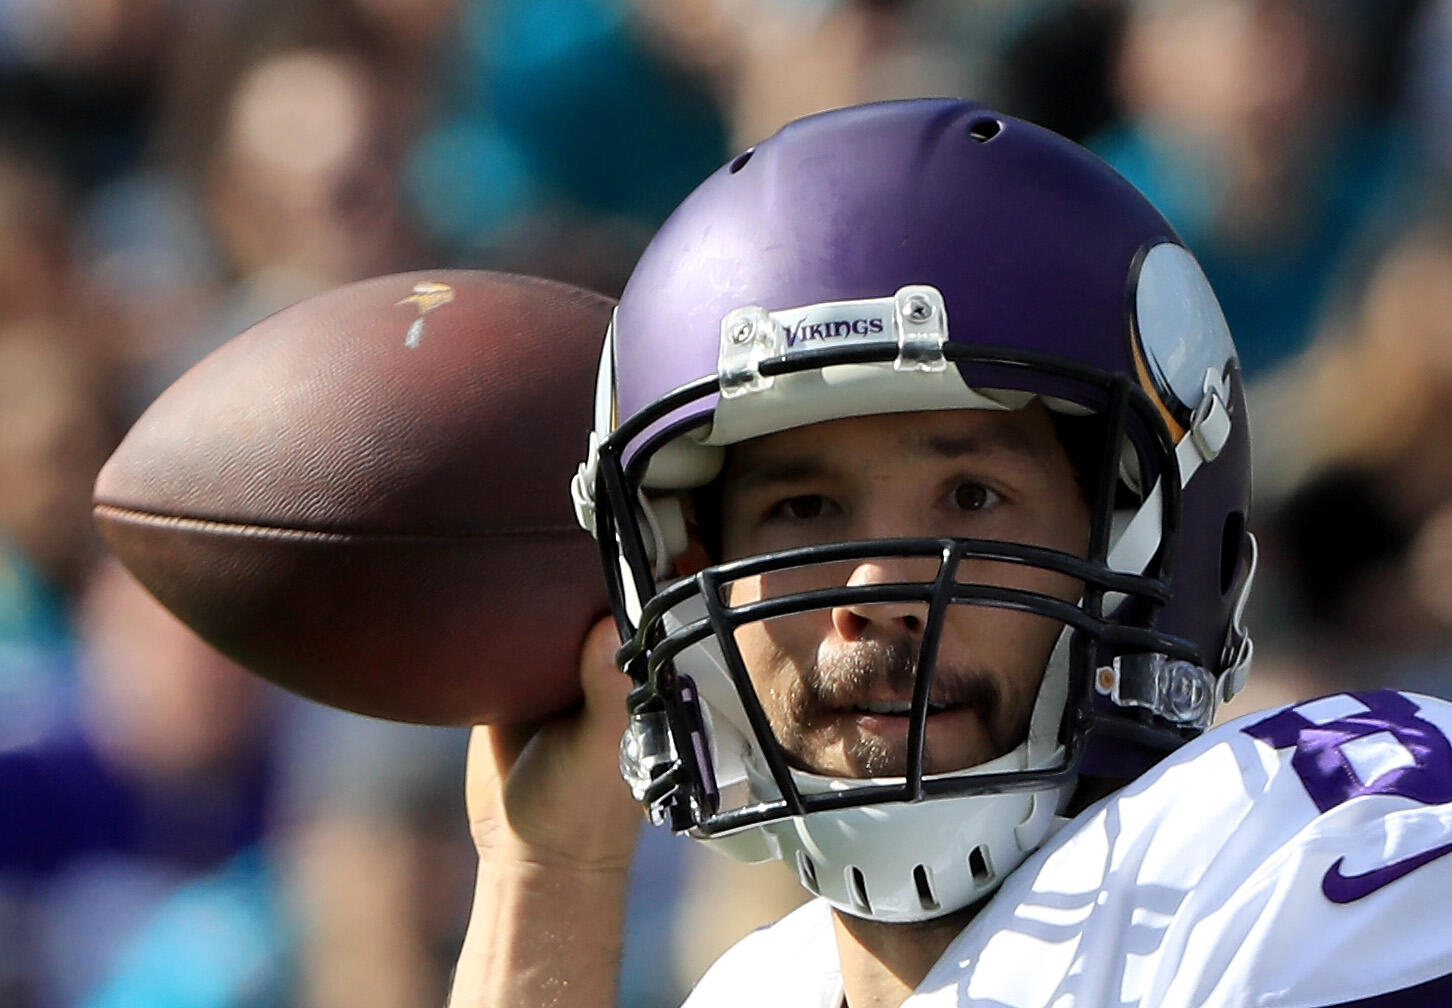 JACKSONVILLE, FL - DECEMBER 11:   Sam Bradford #8 of the Minnesota Vikings attempts a pass during the game against the Jacksonville Jaguars at EverBank Field on December 11, 2016 in Jacksonville, Florida.  (Photo by Sam Greenwood/Getty Images)